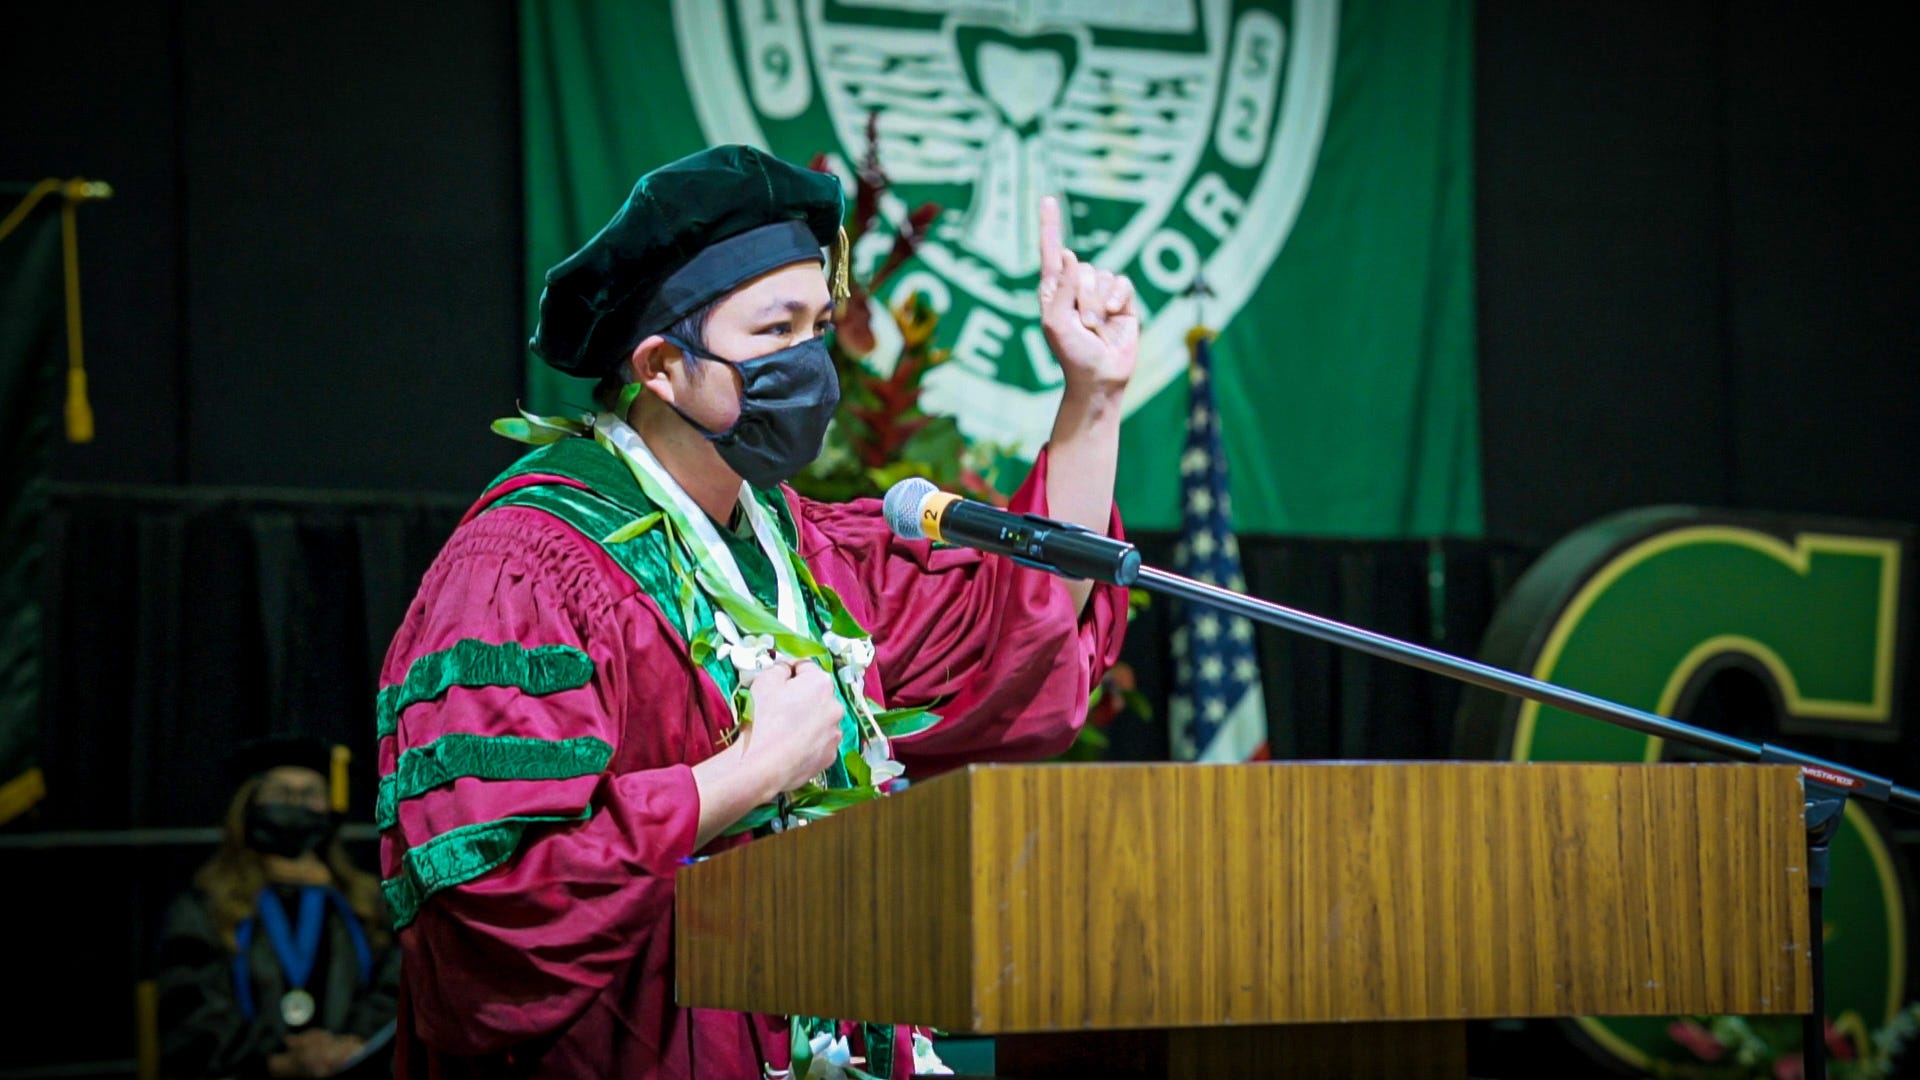 Dr. Edison Manaloto, a two-time University of Guam alumnus and now a doctor at Guam Regional Medical City, delivers the keynote speech for the university’s virtual commencement ceremony in December 2020.